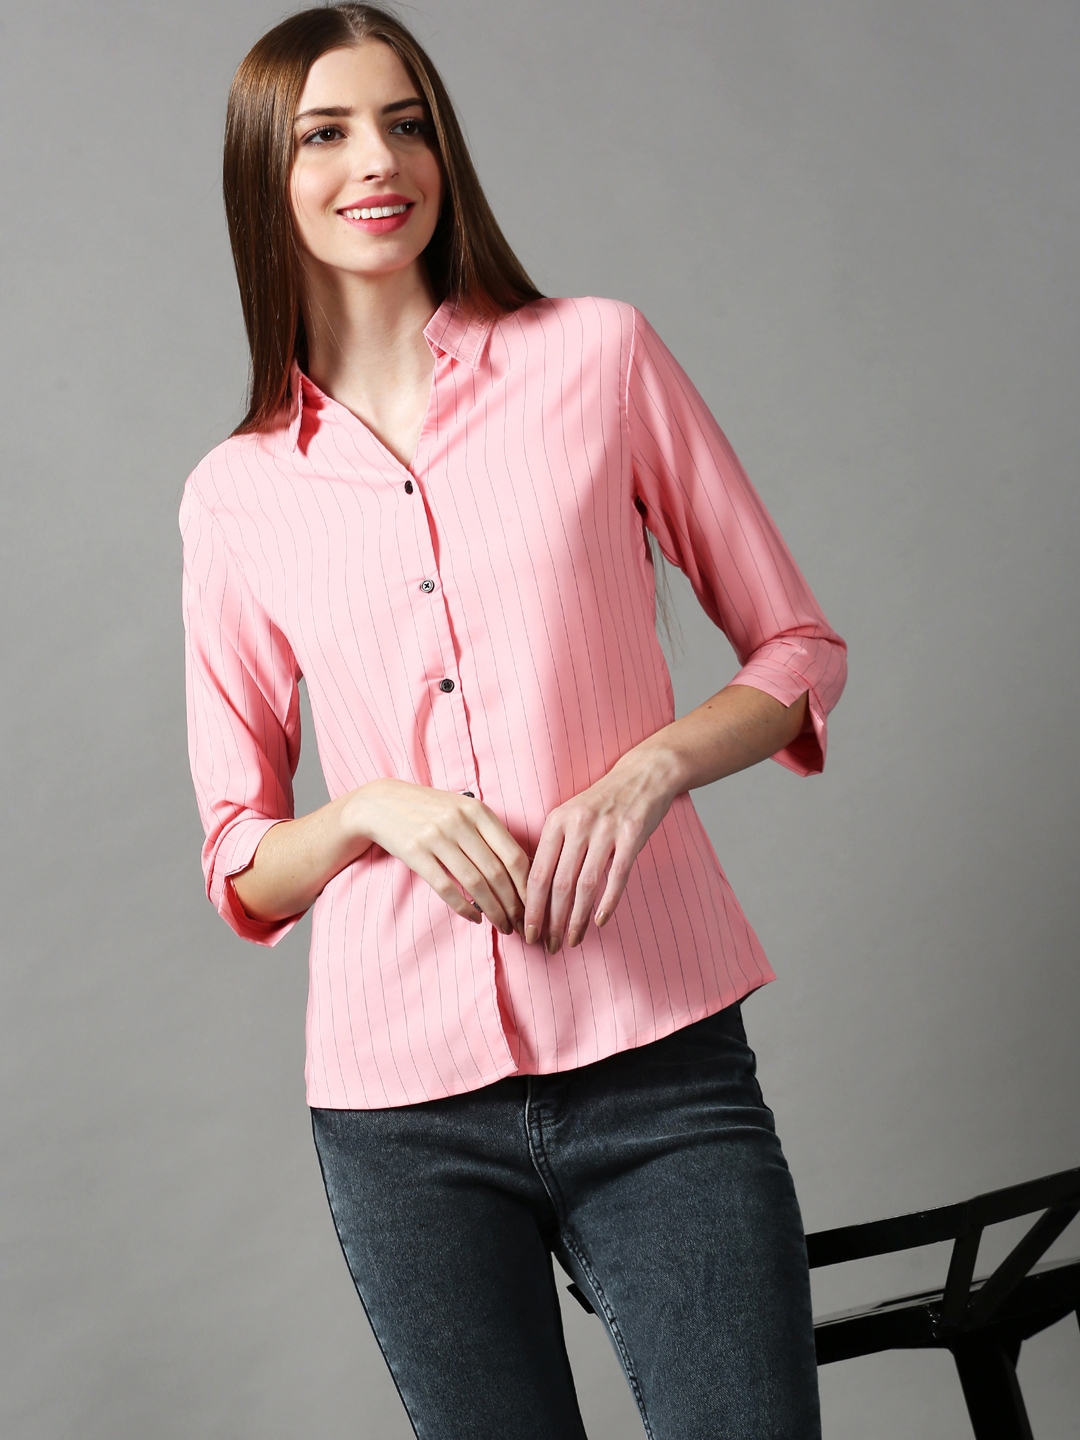 SHOWOFF Women's Spread Collar Striped Pink Polyester Shirt